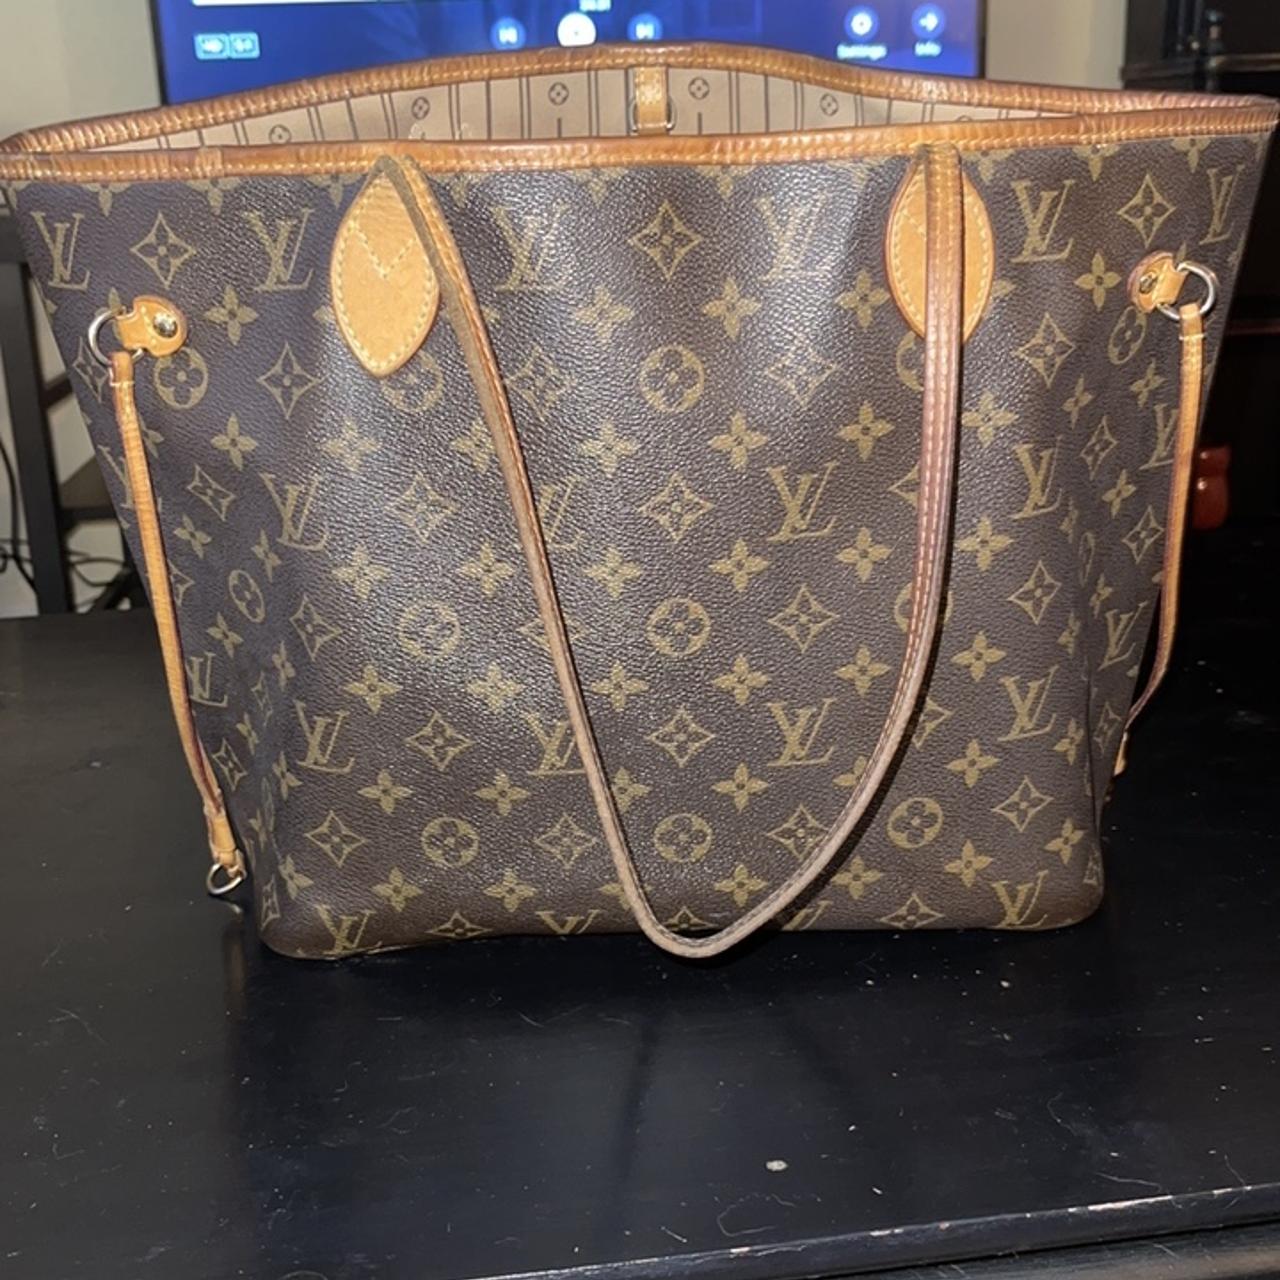 Louis Vuitton “Never Full” Bag - Used (2 years old). - Depop